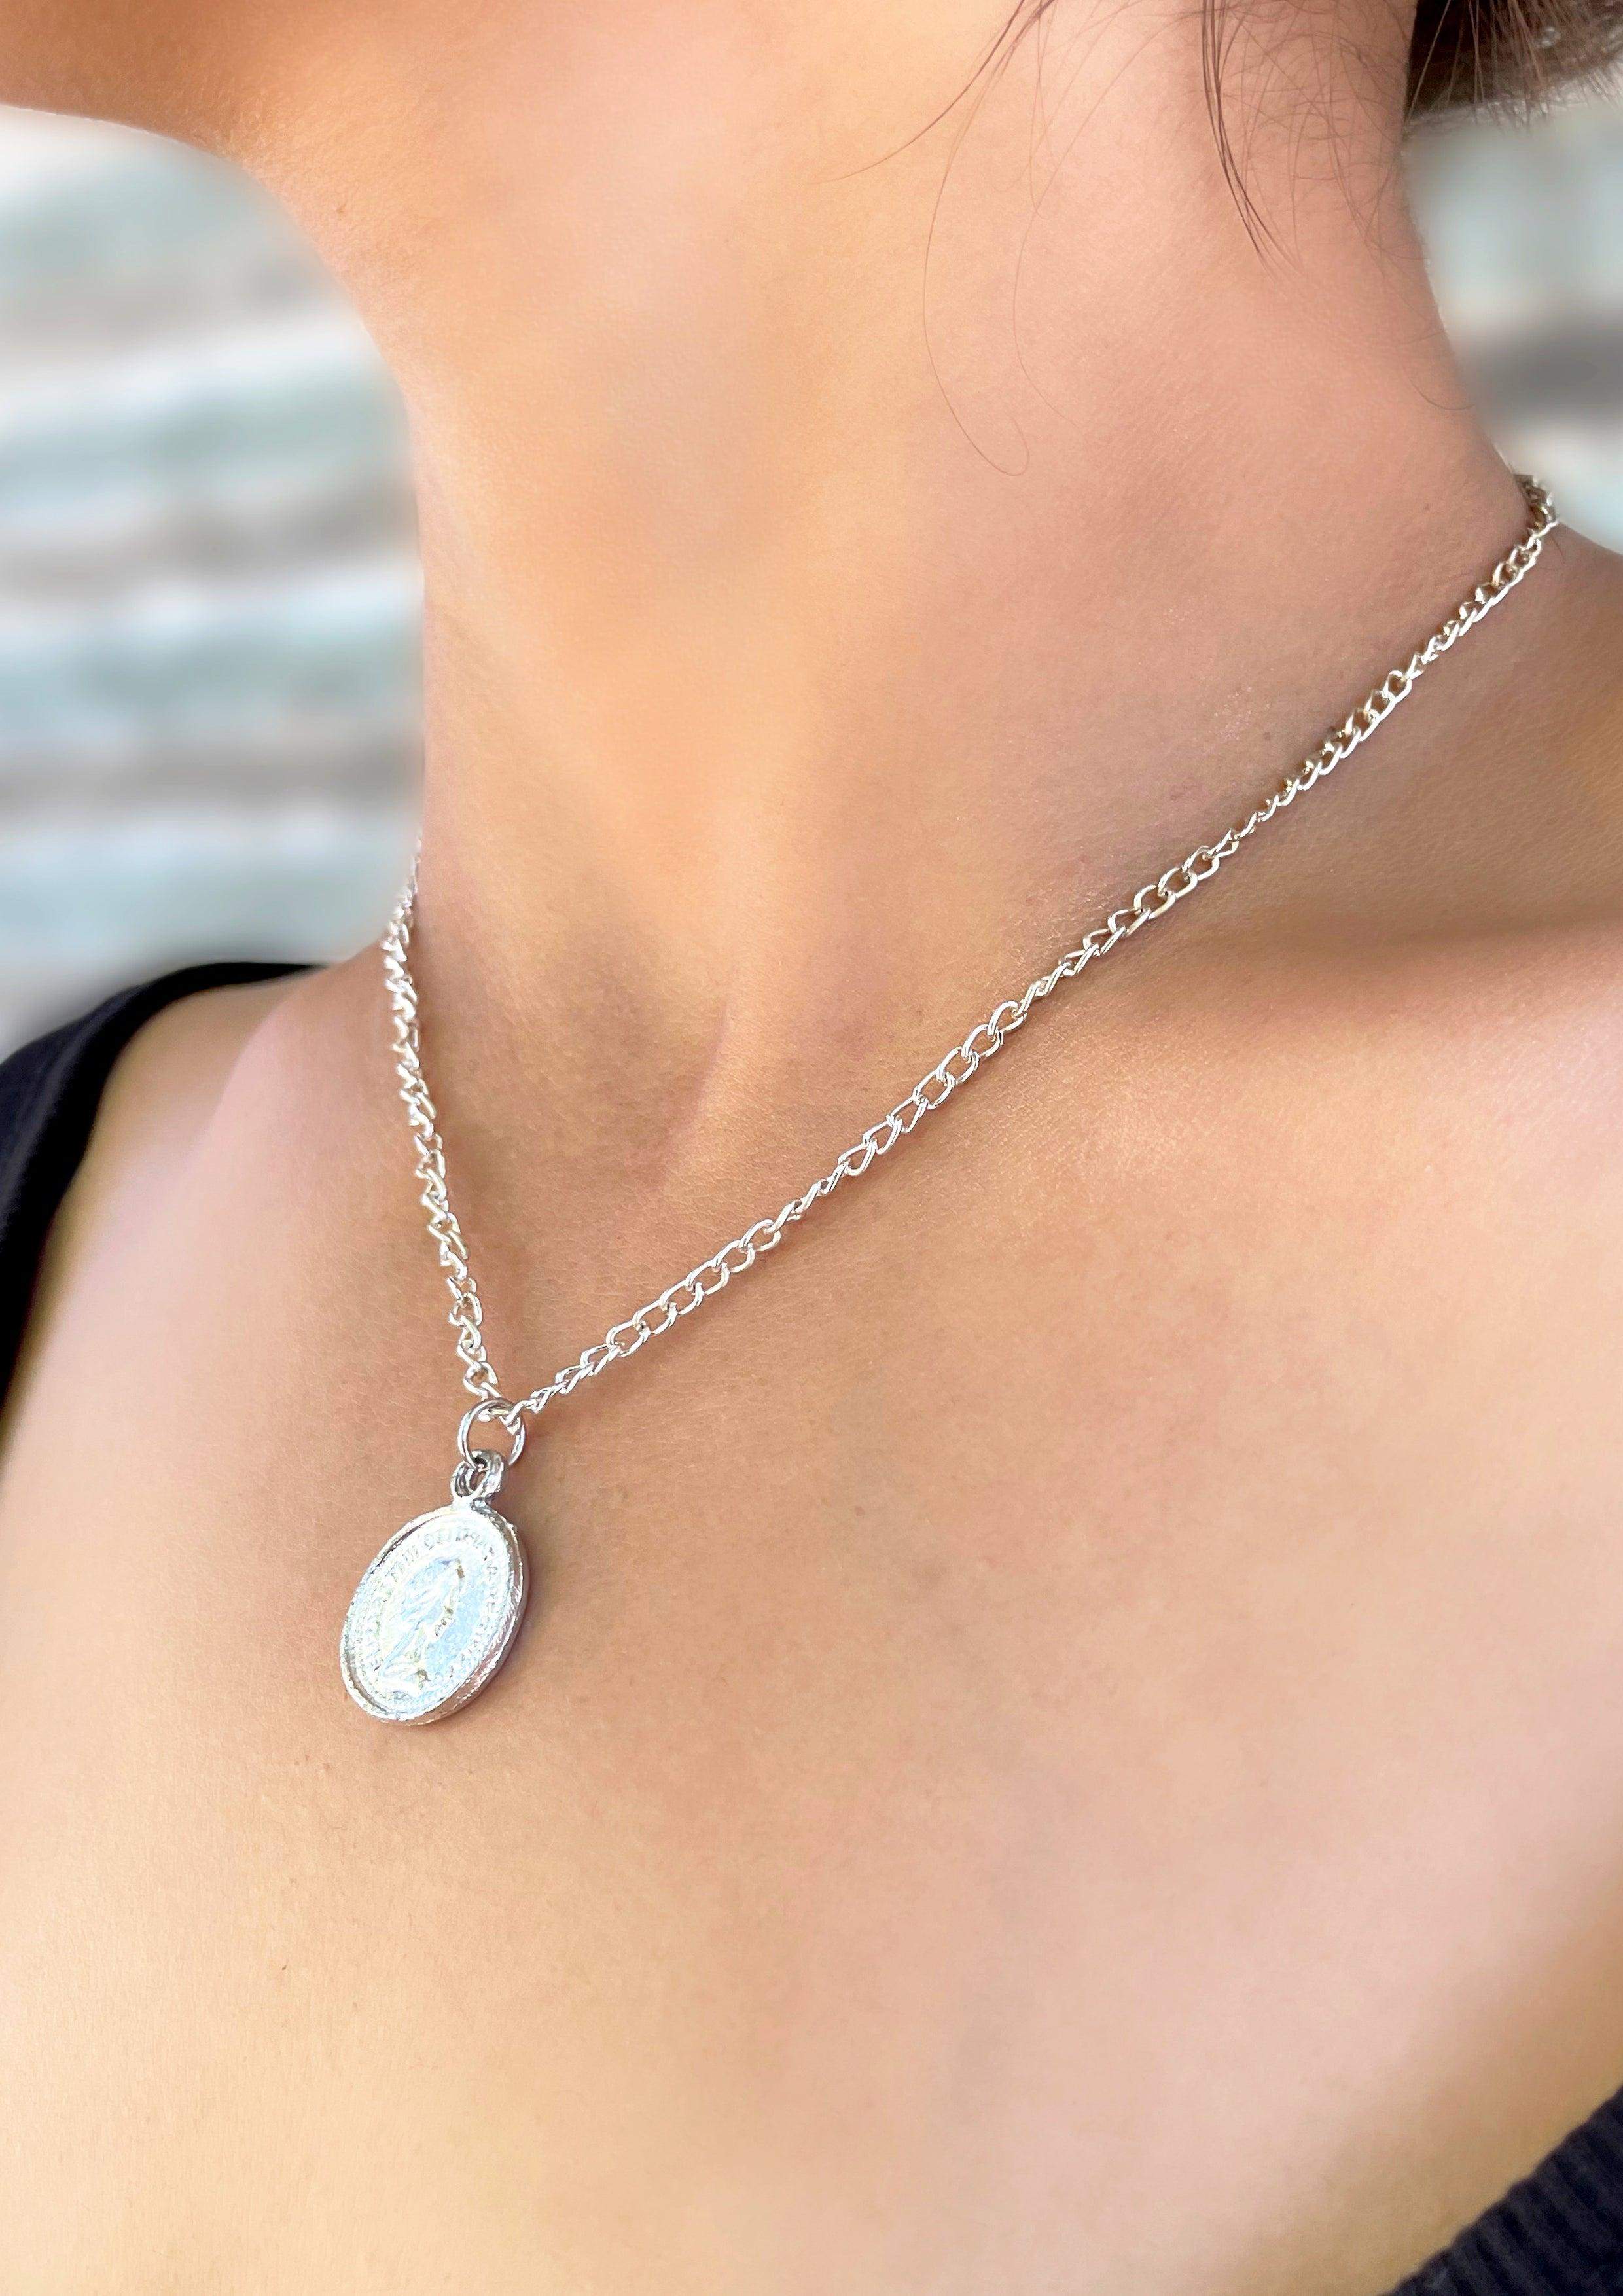 Silver Coin Chain Necklace-Slayink-accessories,chain,chain necklace,Choker,coin pendant,jewellery,necklace,necklaces,pendant,Silver chain,Silver Chain Choker